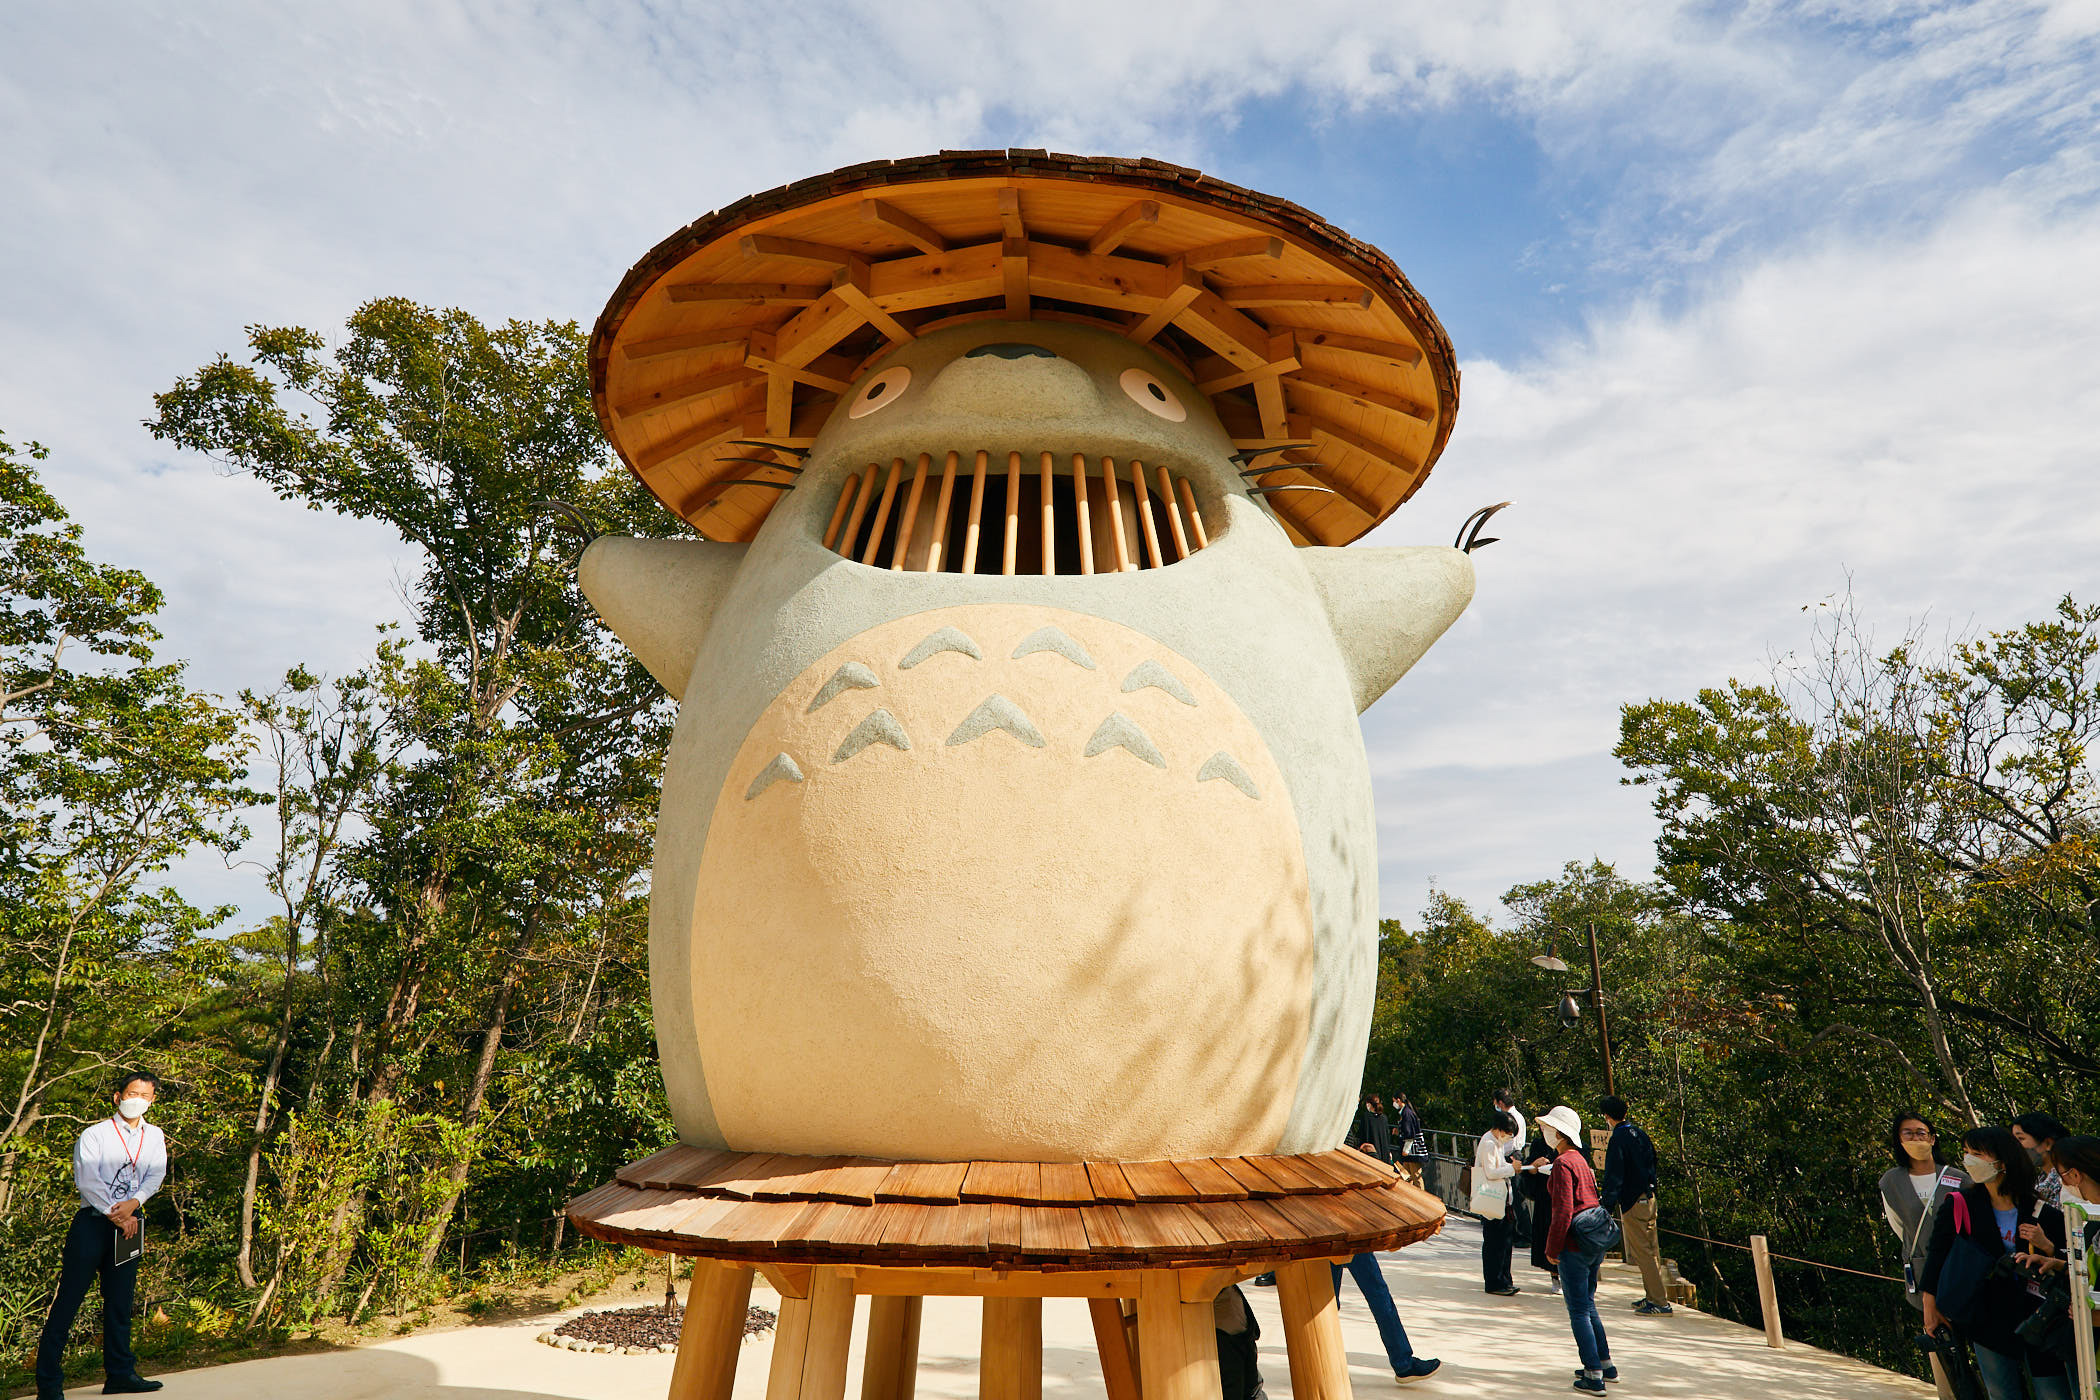 Everything you should know about Ghibli Park: opening, tickets, etc